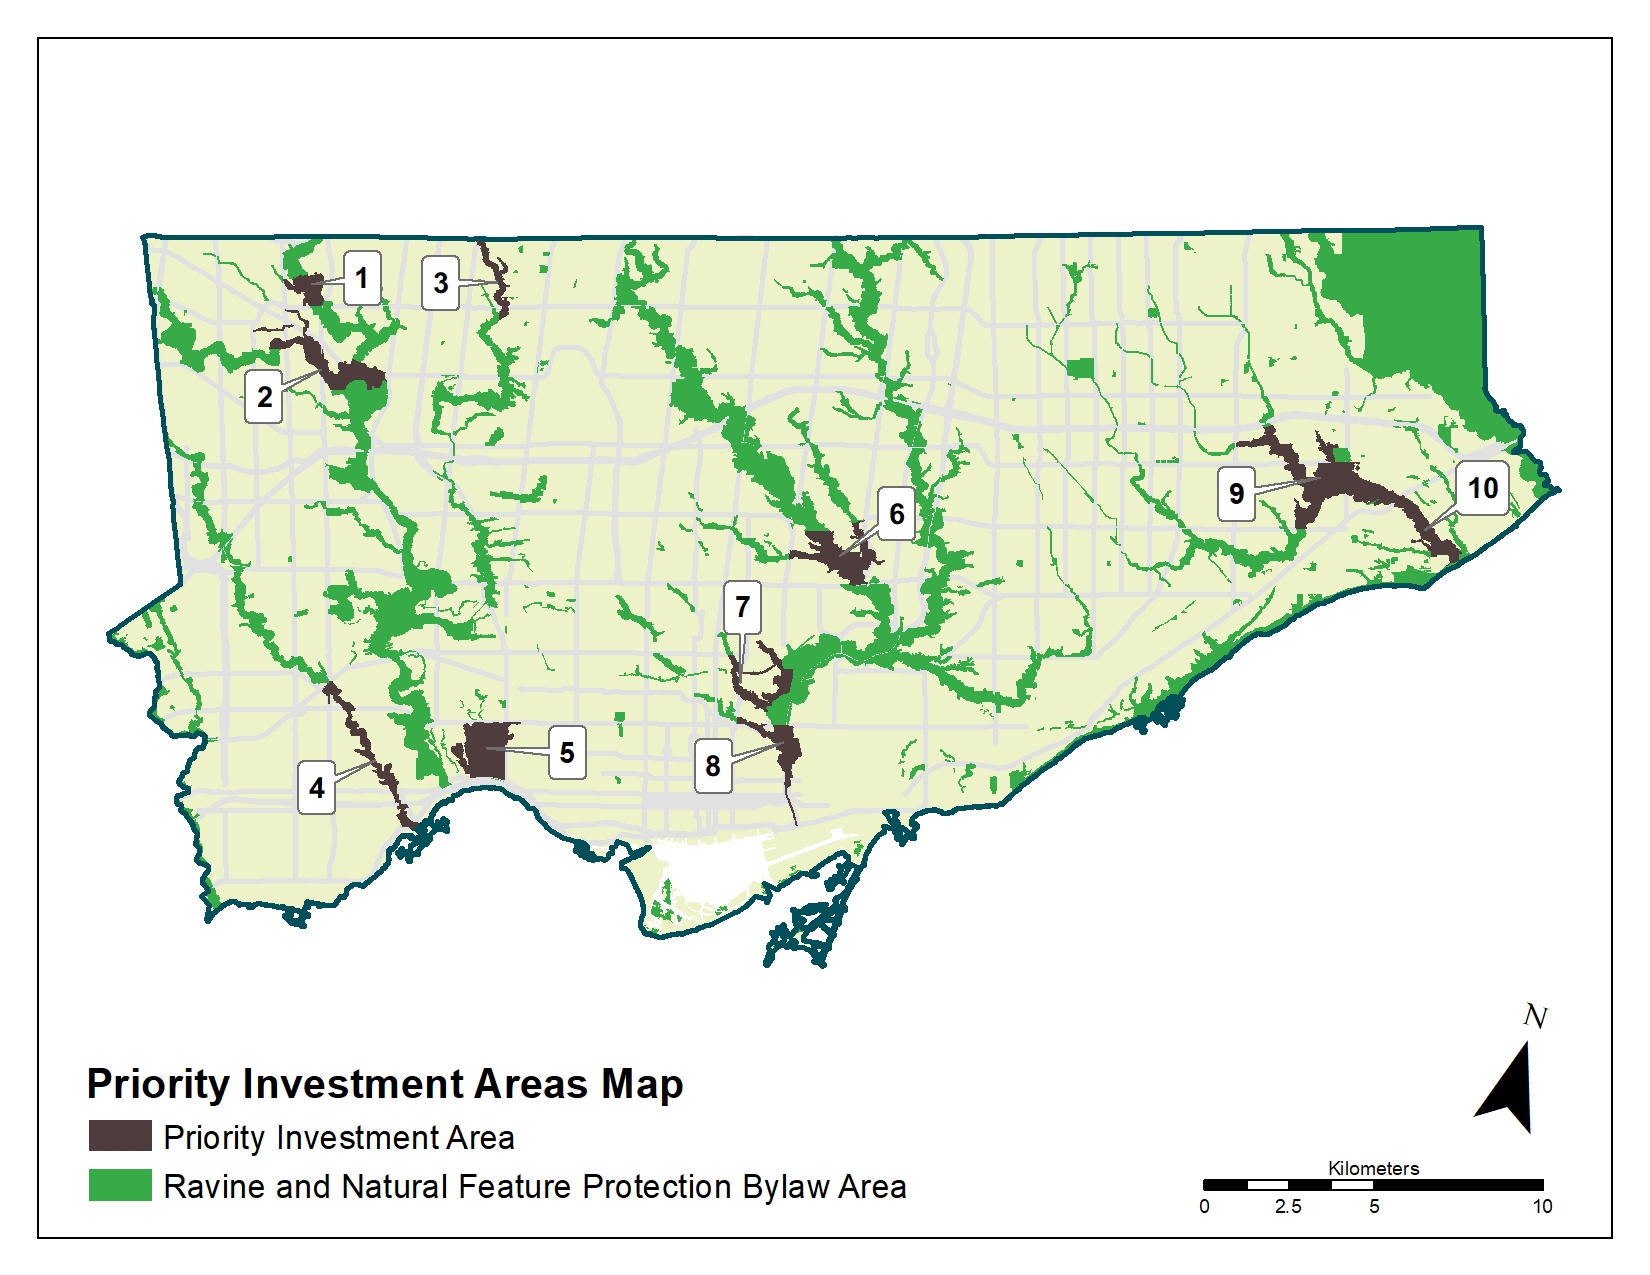 Map of Toronto showing the location of the ten Ravine Strategy Priority Investment Areas. The areas are numbered, and described further following the image. This image also shows the areas protected by the Ravine By-Law. 